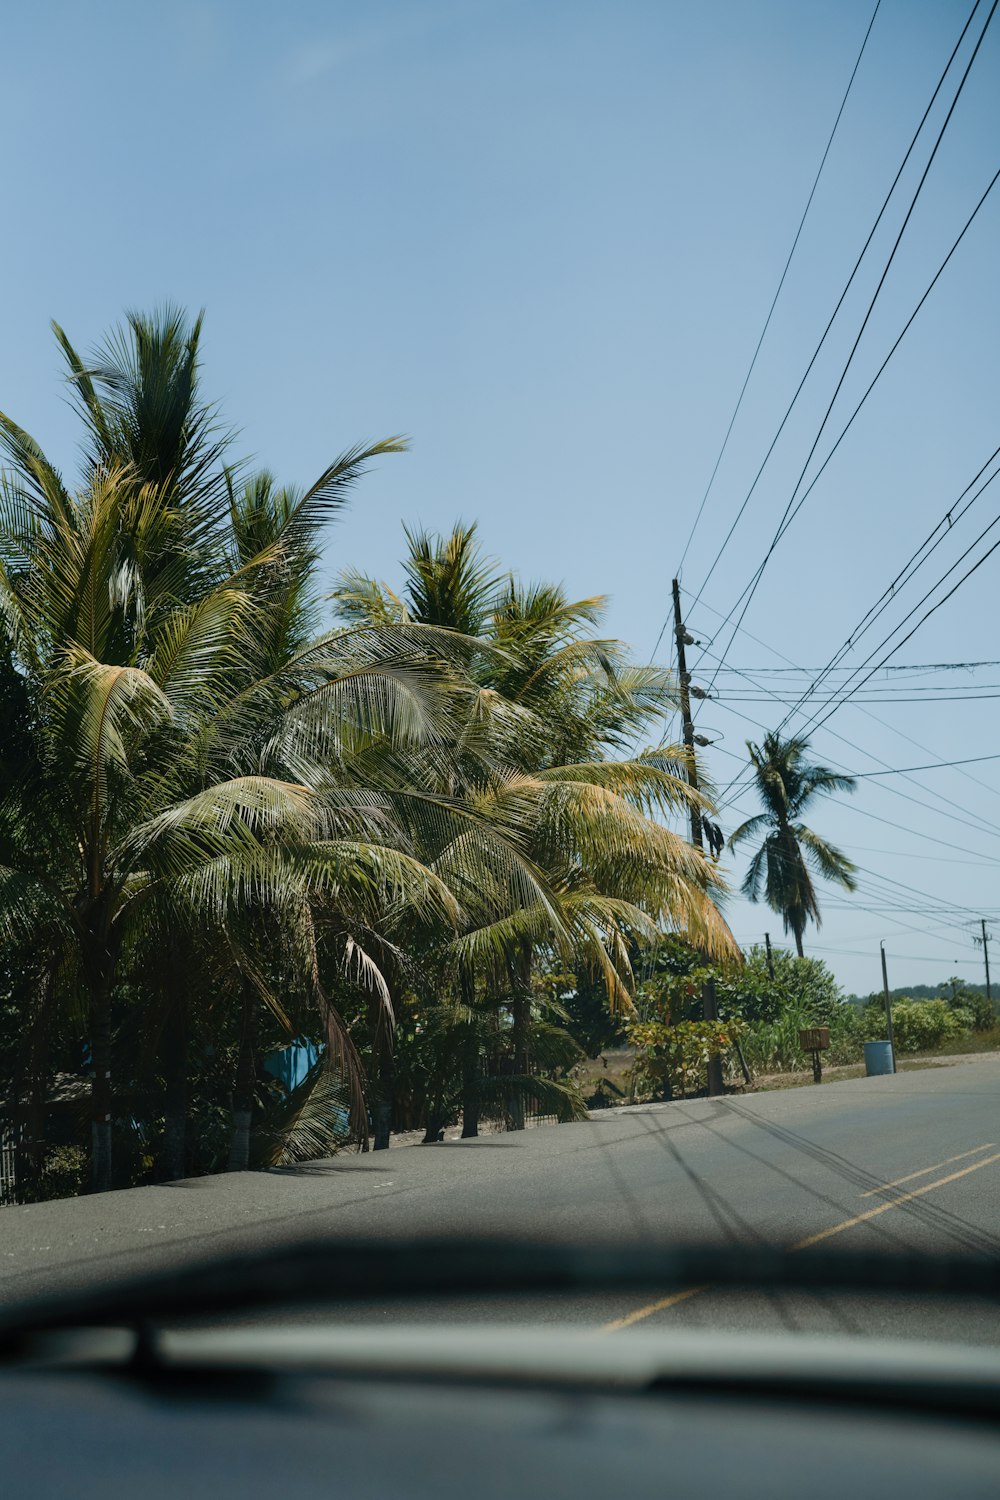 a view of palm trees from inside a car